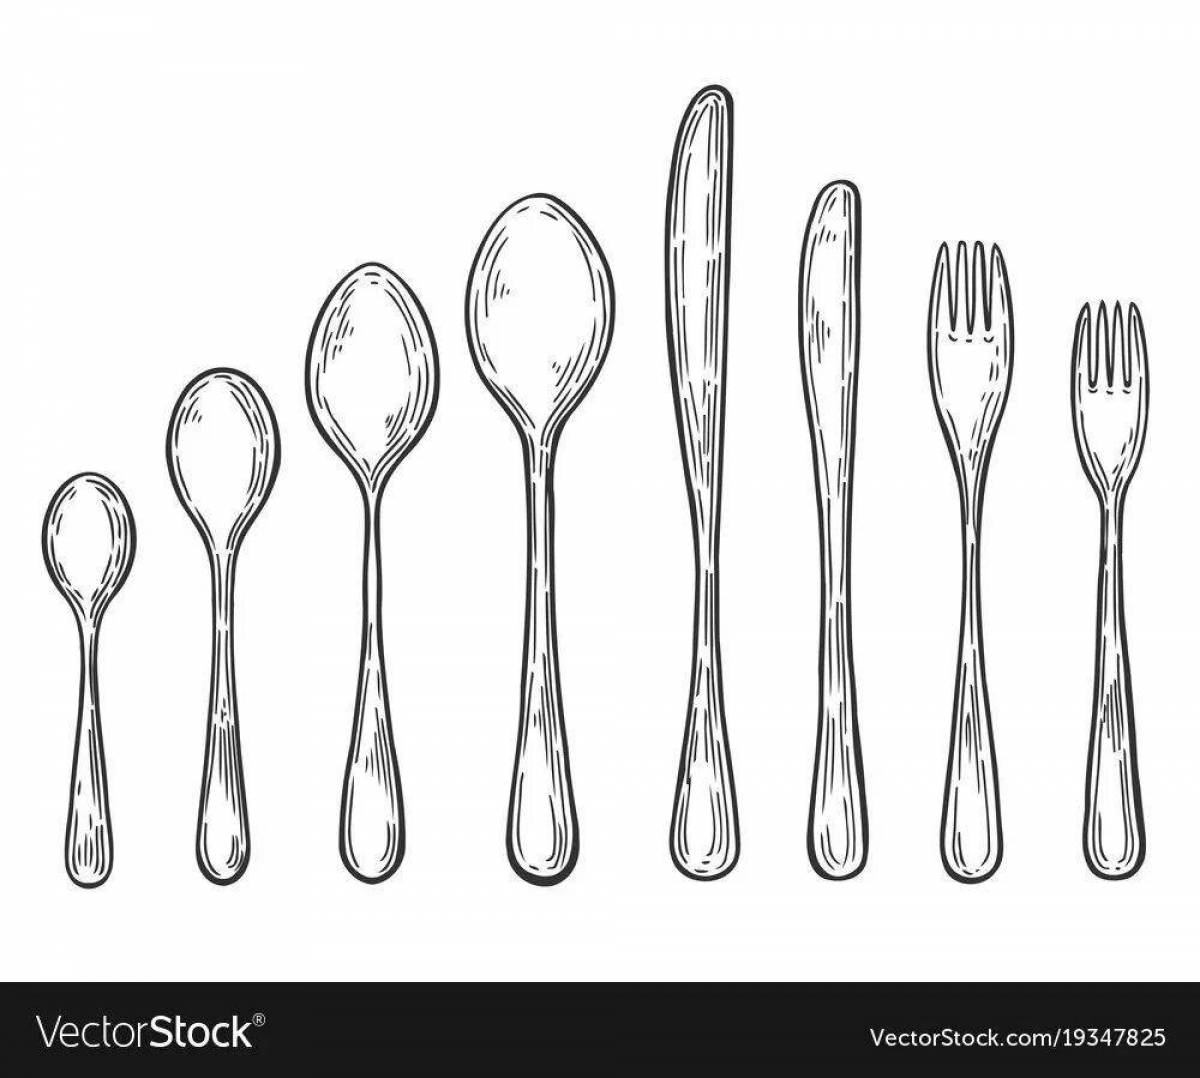 Living cutlery coloring for kids